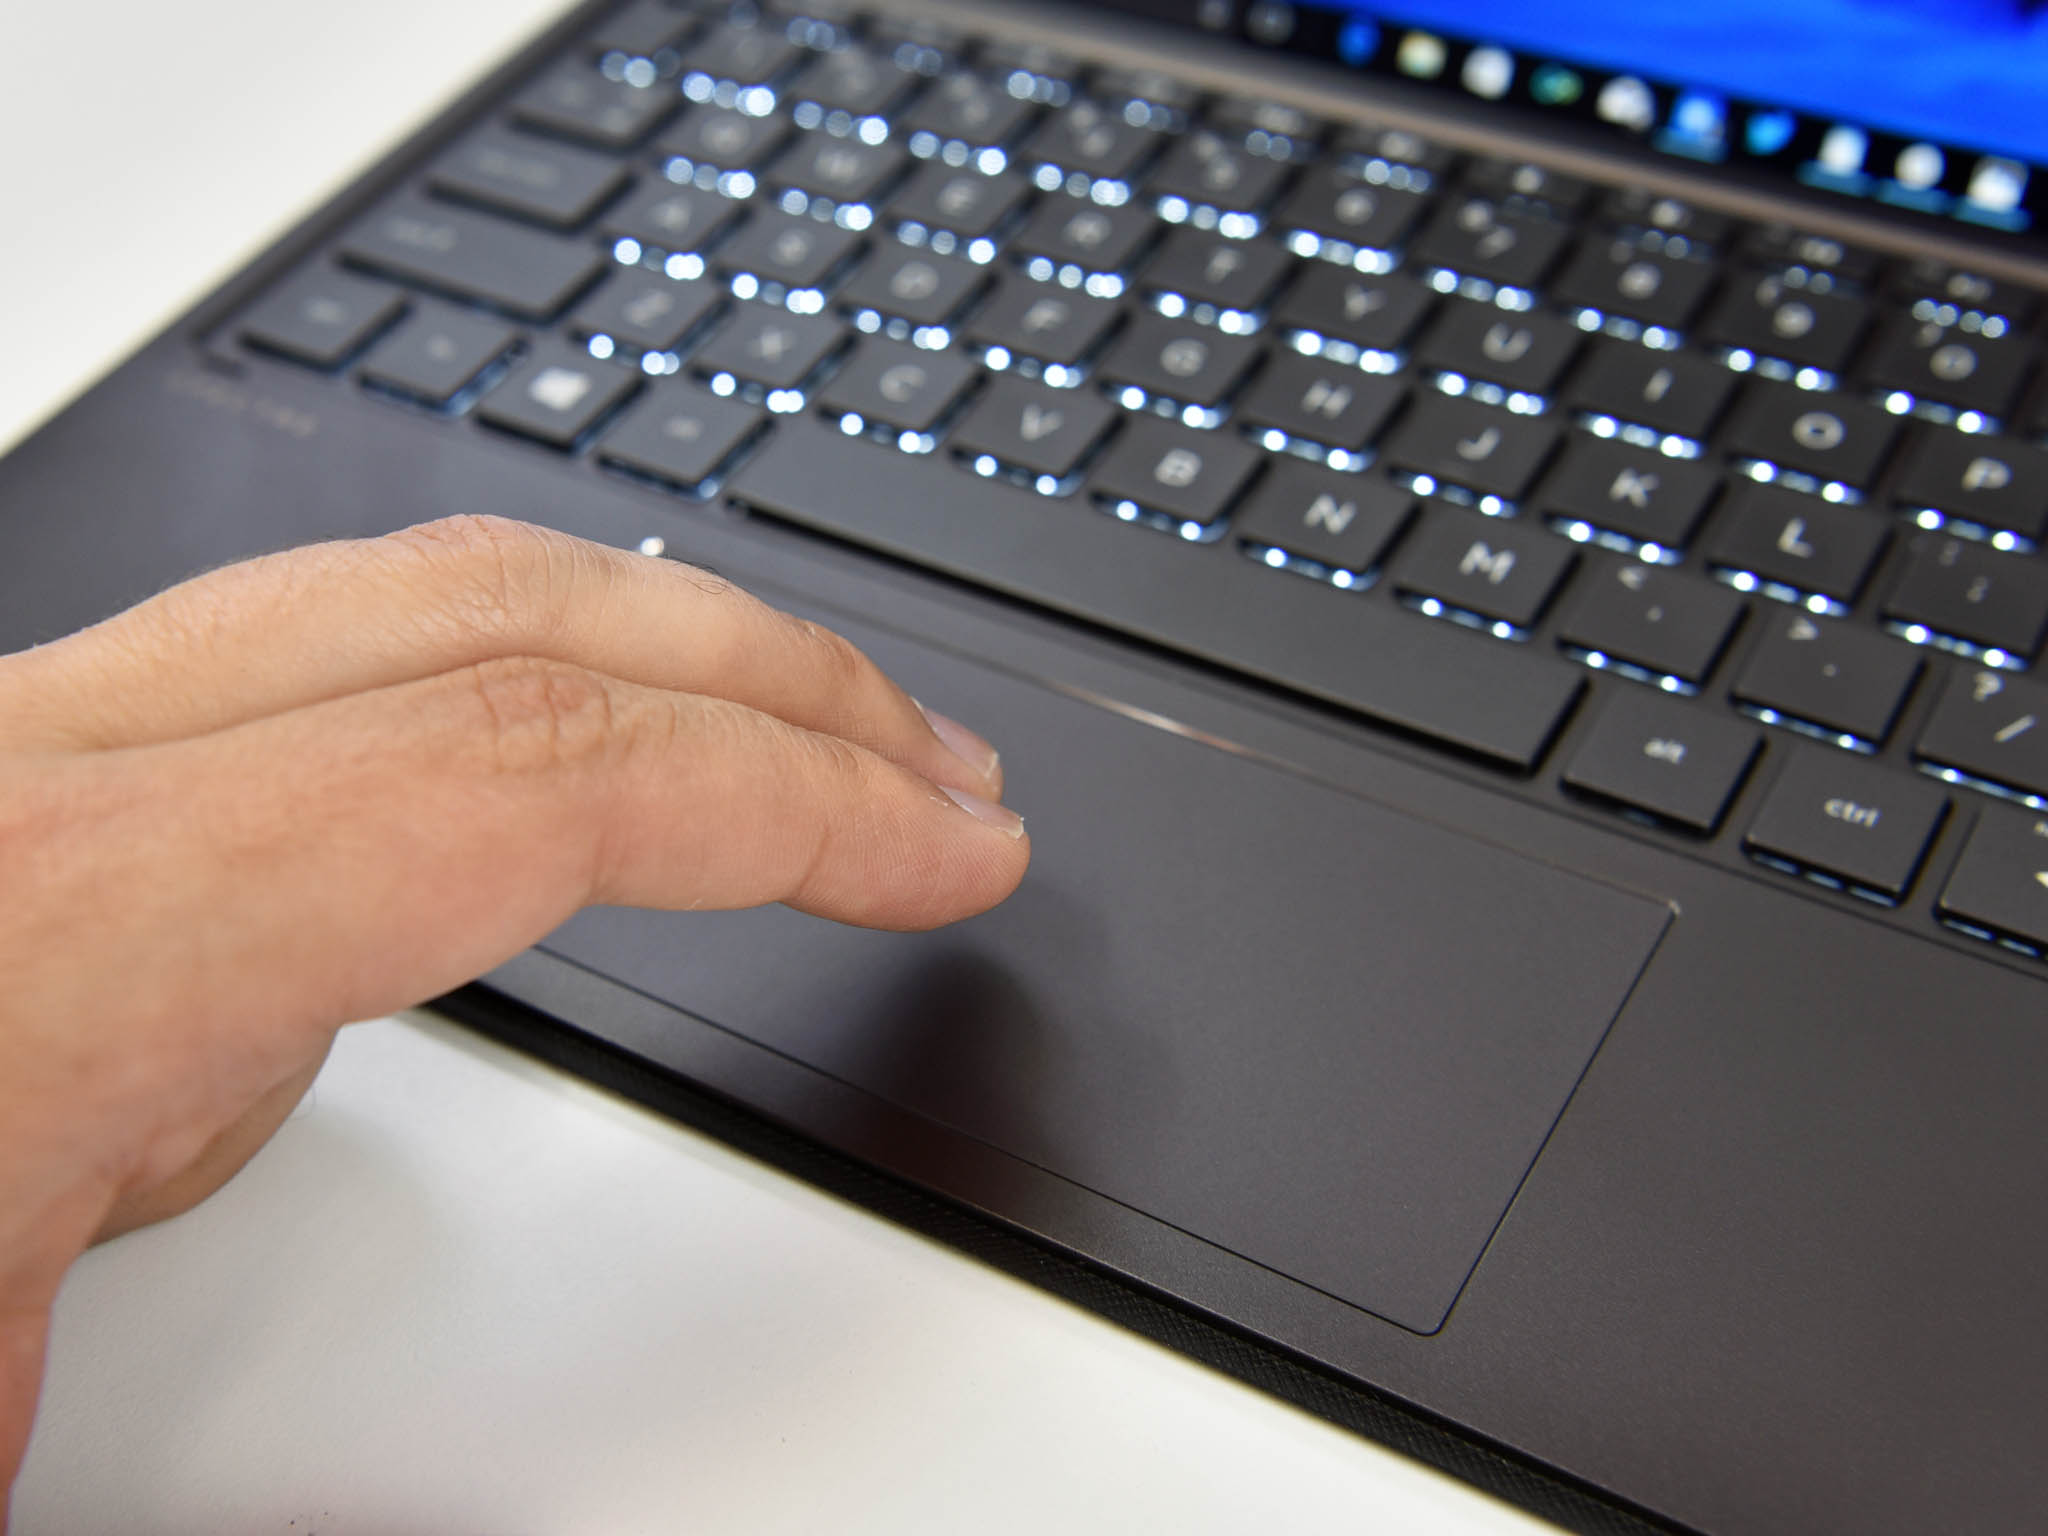 How to enable a Precision Touchpad for more gestures on your laptop |  Windows Central